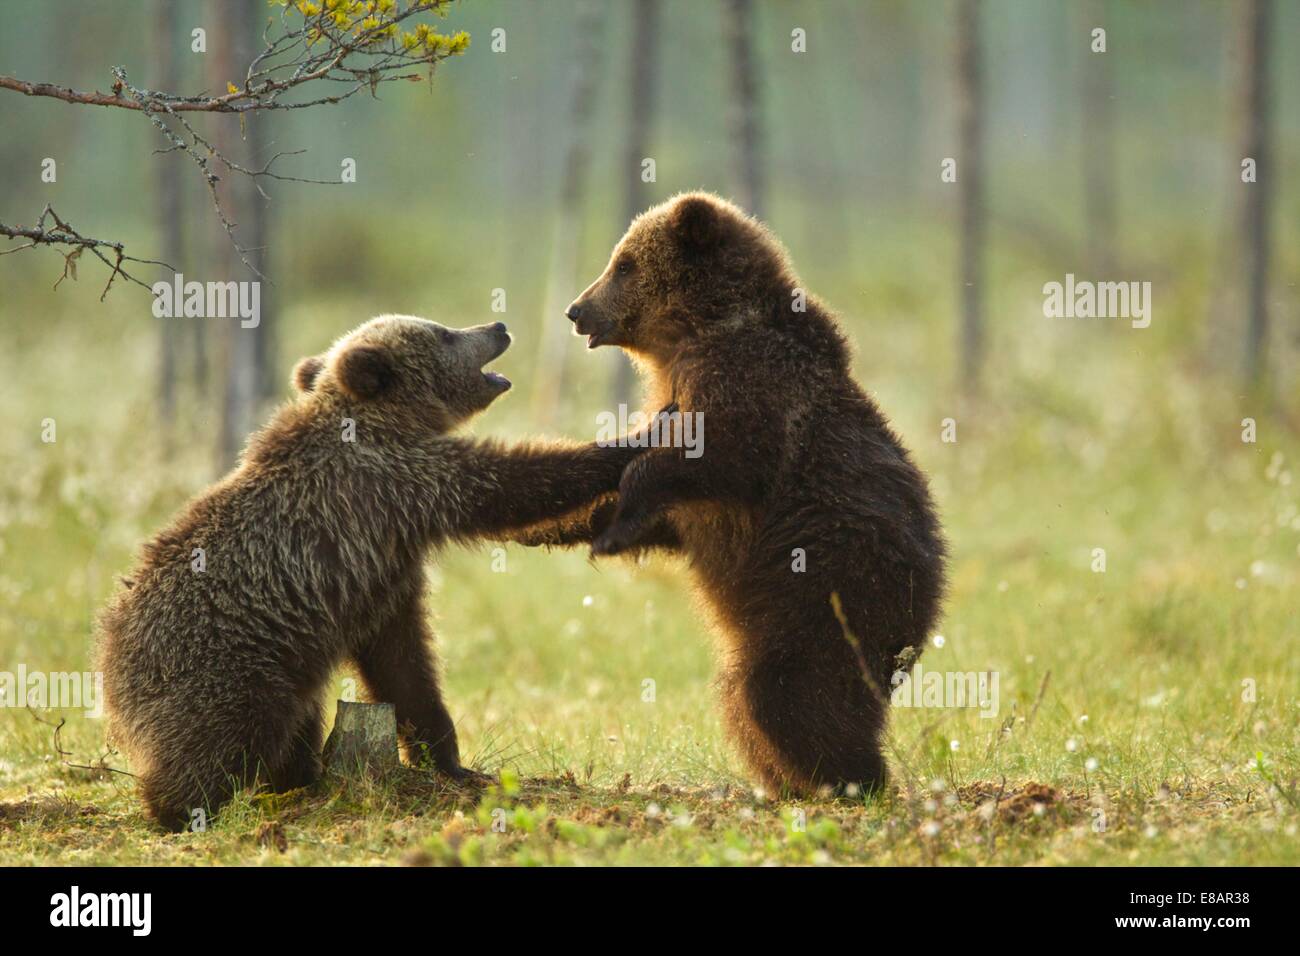 Two brown bear cubs play fighting (Ursus arctos) in Taiga Forest, Finland Stock Photo